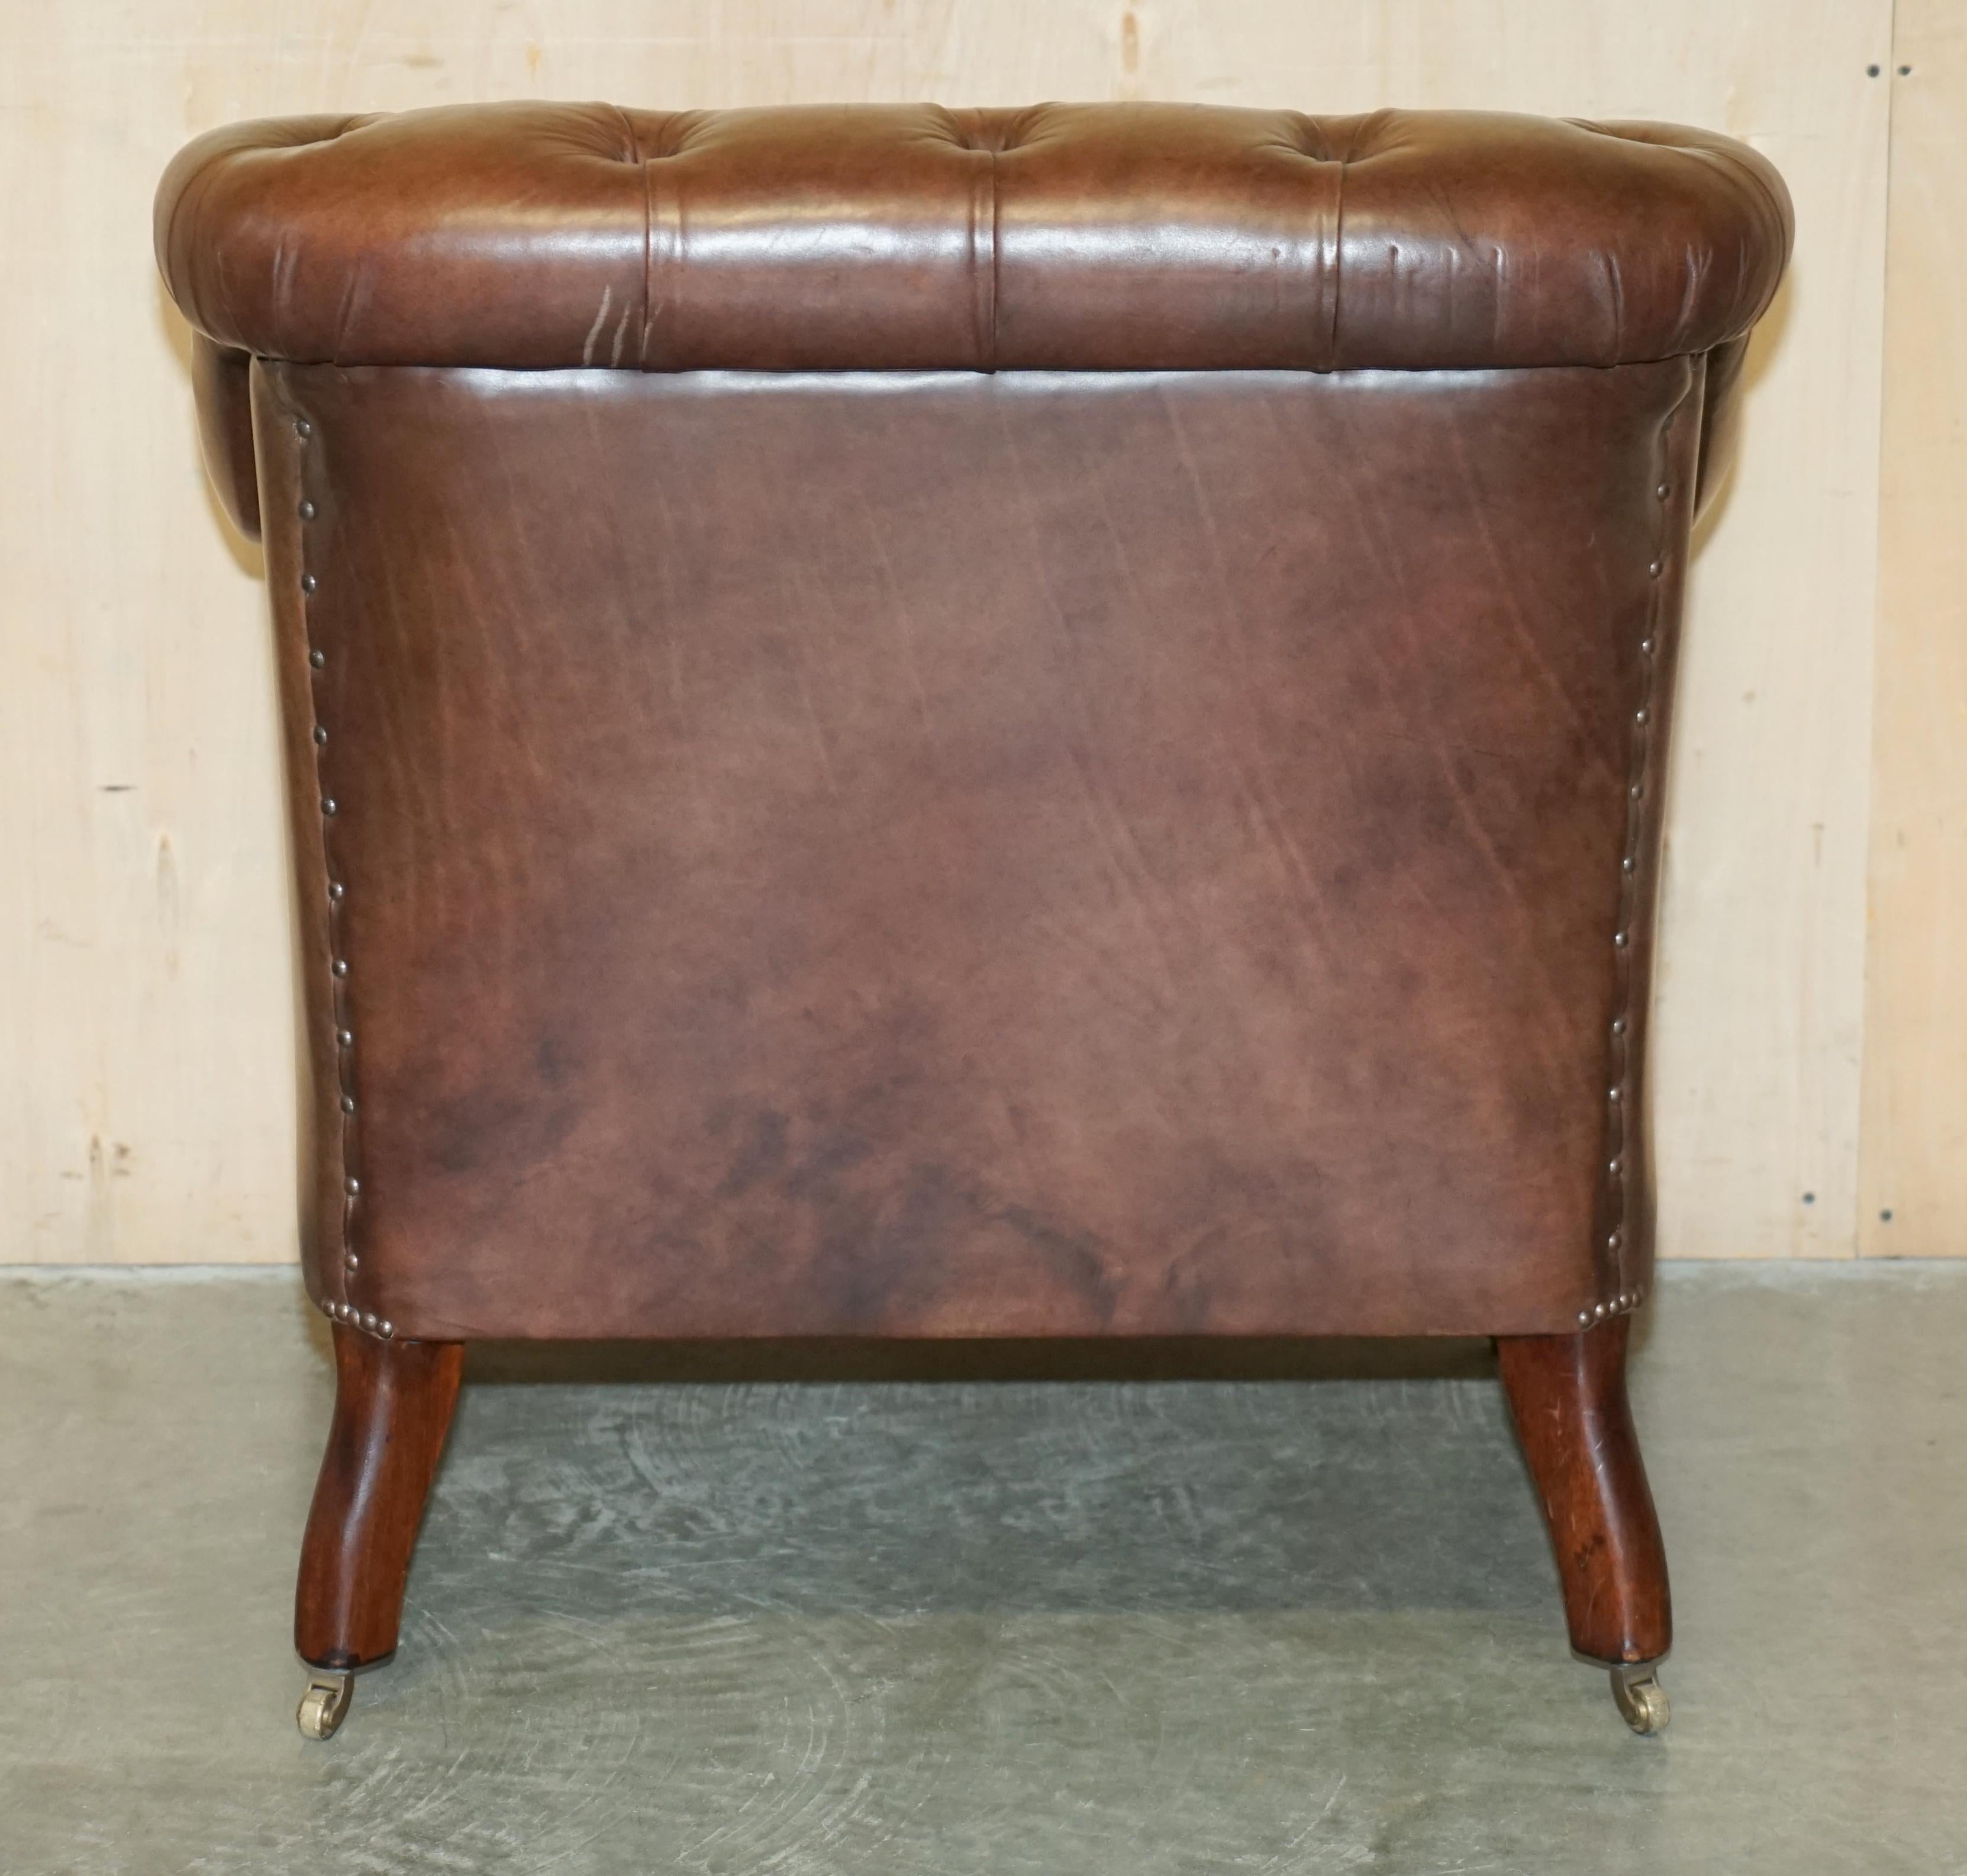  GEORGE SMiTH SOMERVILLE BROWN LEATHER CHESTERFIELD ARMCHAIR For Sale 9